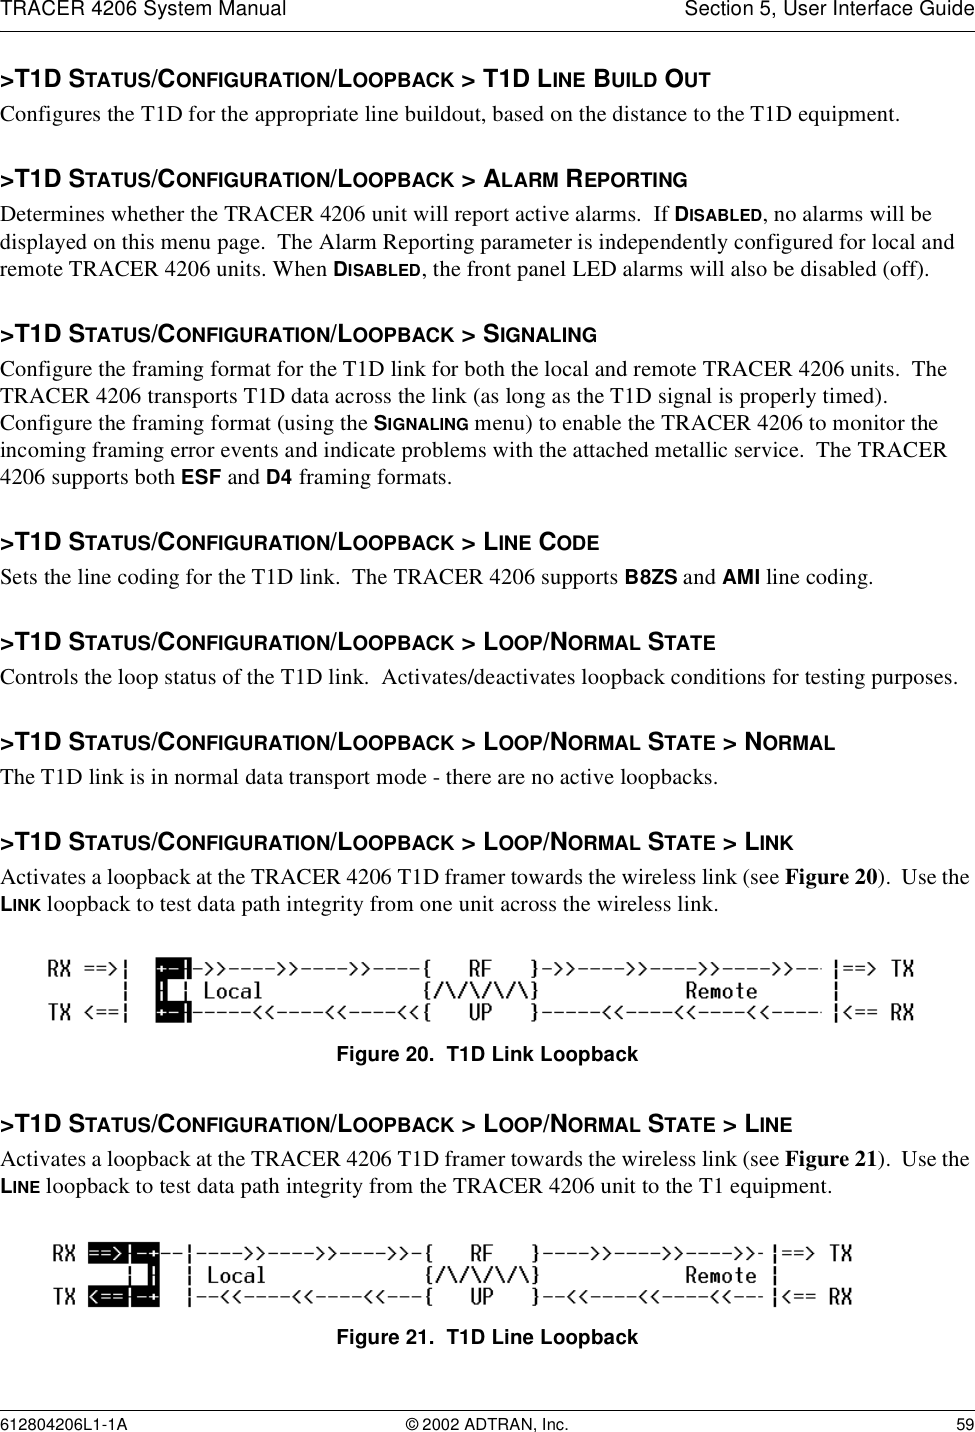 TRACER 4206 System Manual Section 5, User Interface Guide612804206L1-1A © 2002 ADTRAN, Inc. 59&gt;T1D STATUS/CONFIGURATION/LOOPBACK &gt; T1D LINE BUILD OUTConfigures the T1D for the appropriate line buildout, based on the distance to the T1D equipment.  &gt;T1D STATUS/CONFIGURATION/LOOPBACK &gt; ALARM REPORTINGDetermines whether the TRACER 4206 unit will report active alarms.  If DISABLED, no alarms will be displayed on this menu page.  The Alarm Reporting parameter is independently configured for local and remote TRACER 4206 units. When DISABLED, the front panel LED alarms will also be disabled (off).&gt;T1D STATUS/CONFIGURATION/LOOPBACK &gt; SIGNALINGConfigure the framing format for the T1D link for both the local and remote TRACER 4206 units.  The TRACER 4206 transports T1D data across the link (as long as the T1D signal is properly timed).  Configure the framing format (using the SIGNALING menu) to enable the TRACER 4206 to monitor the incoming framing error events and indicate problems with the attached metallic service.  The TRACER 4206 supports both ESF and D4 framing formats.&gt;T1D STATUS/CONFIGURATION/LOOPBACK &gt; LINE CODESets the line coding for the T1D link.  The TRACER 4206 supports B8ZS and AMI line coding.&gt;T1D STATUS/CONFIGURATION/LOOPBACK &gt; LOOP/NORMAL STATEControls the loop status of the T1D link.  Activates/deactivates loopback conditions for testing purposes.&gt;T1D STATUS/CONFIGURATION/LOOPBACK &gt; LOOP/NORMAL STATE &gt; NORMALThe T1D link is in normal data transport mode - there are no active loopbacks.&gt;T1D STATUS/CONFIGURATION/LOOPBACK &gt; LOOP/NORMAL STATE &gt; LINKActivates a loopback at the TRACER 4206 T1D framer towards the wireless link (see Figure 20).  Use the LINK loopback to test data path integrity from one unit across the wireless link.Figure 20.  T1D Link Loopback&gt;T1D STATUS/CONFIGURATION/LOOPBACK &gt; LOOP/NORMAL STATE &gt; LINEActivates a loopback at the TRACER 4206 T1D framer towards the wireless link (see Figure 21).  Use the LINE loopback to test data path integrity from the TRACER 4206 unit to the T1 equipment.Figure 21.  T1D Line Loopback